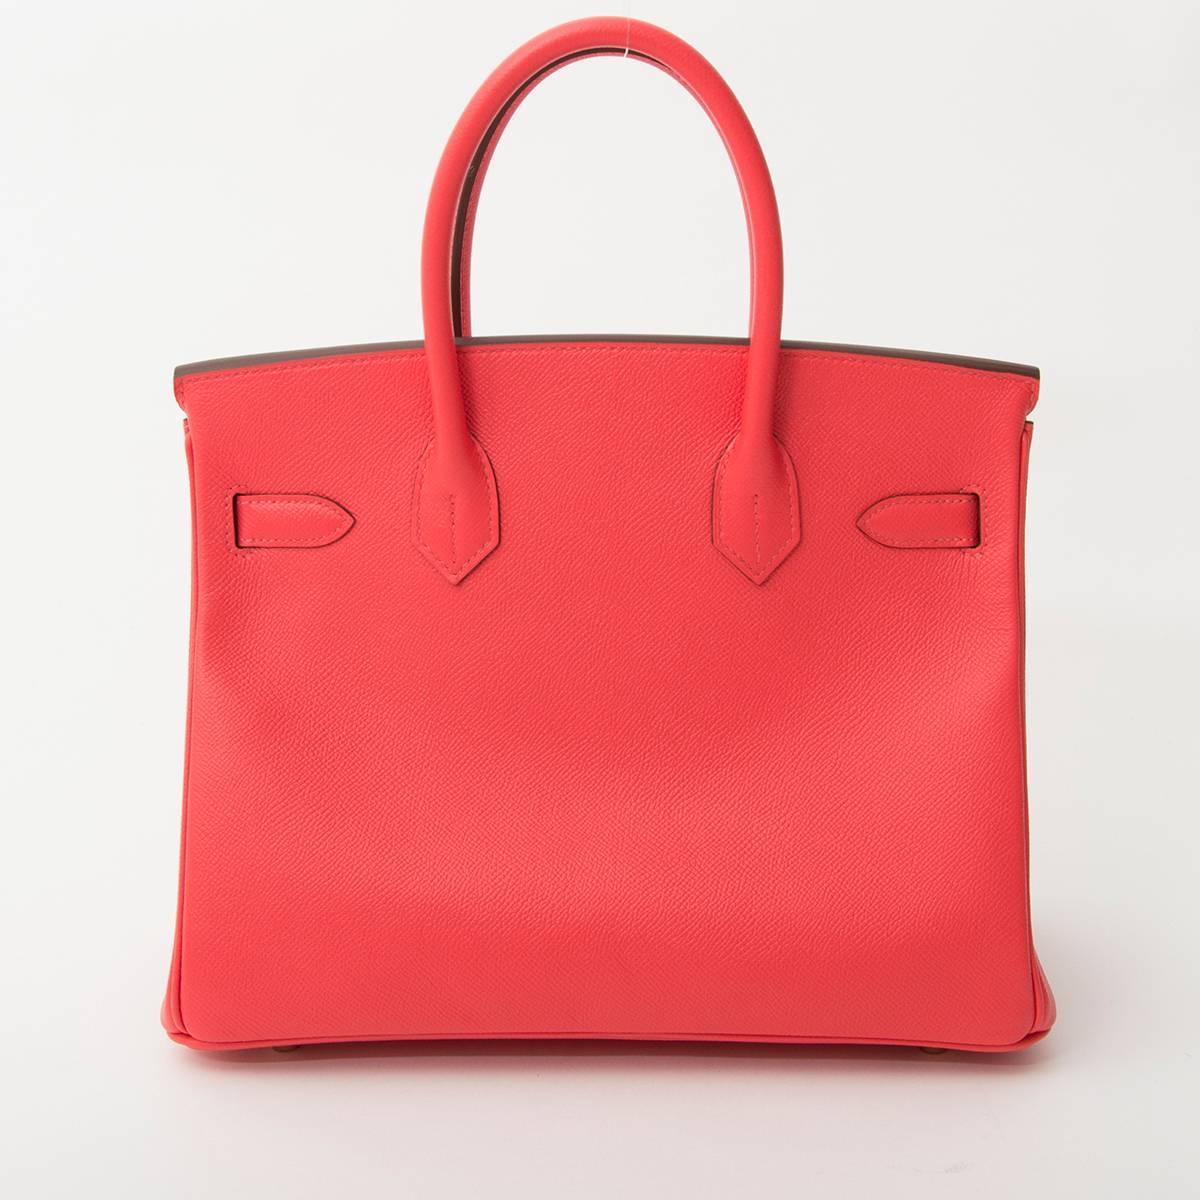 Hermes Birkin 30 Rose Jaipur Epsom
Brand new, recently storebought Hermès Birkin bag measuring 25cm. 
The gold-tone hardware emphasizes the youtfull and feminine appearance of the 'Rose Jaipur' pink Epsom leather body. 

This compressed type of